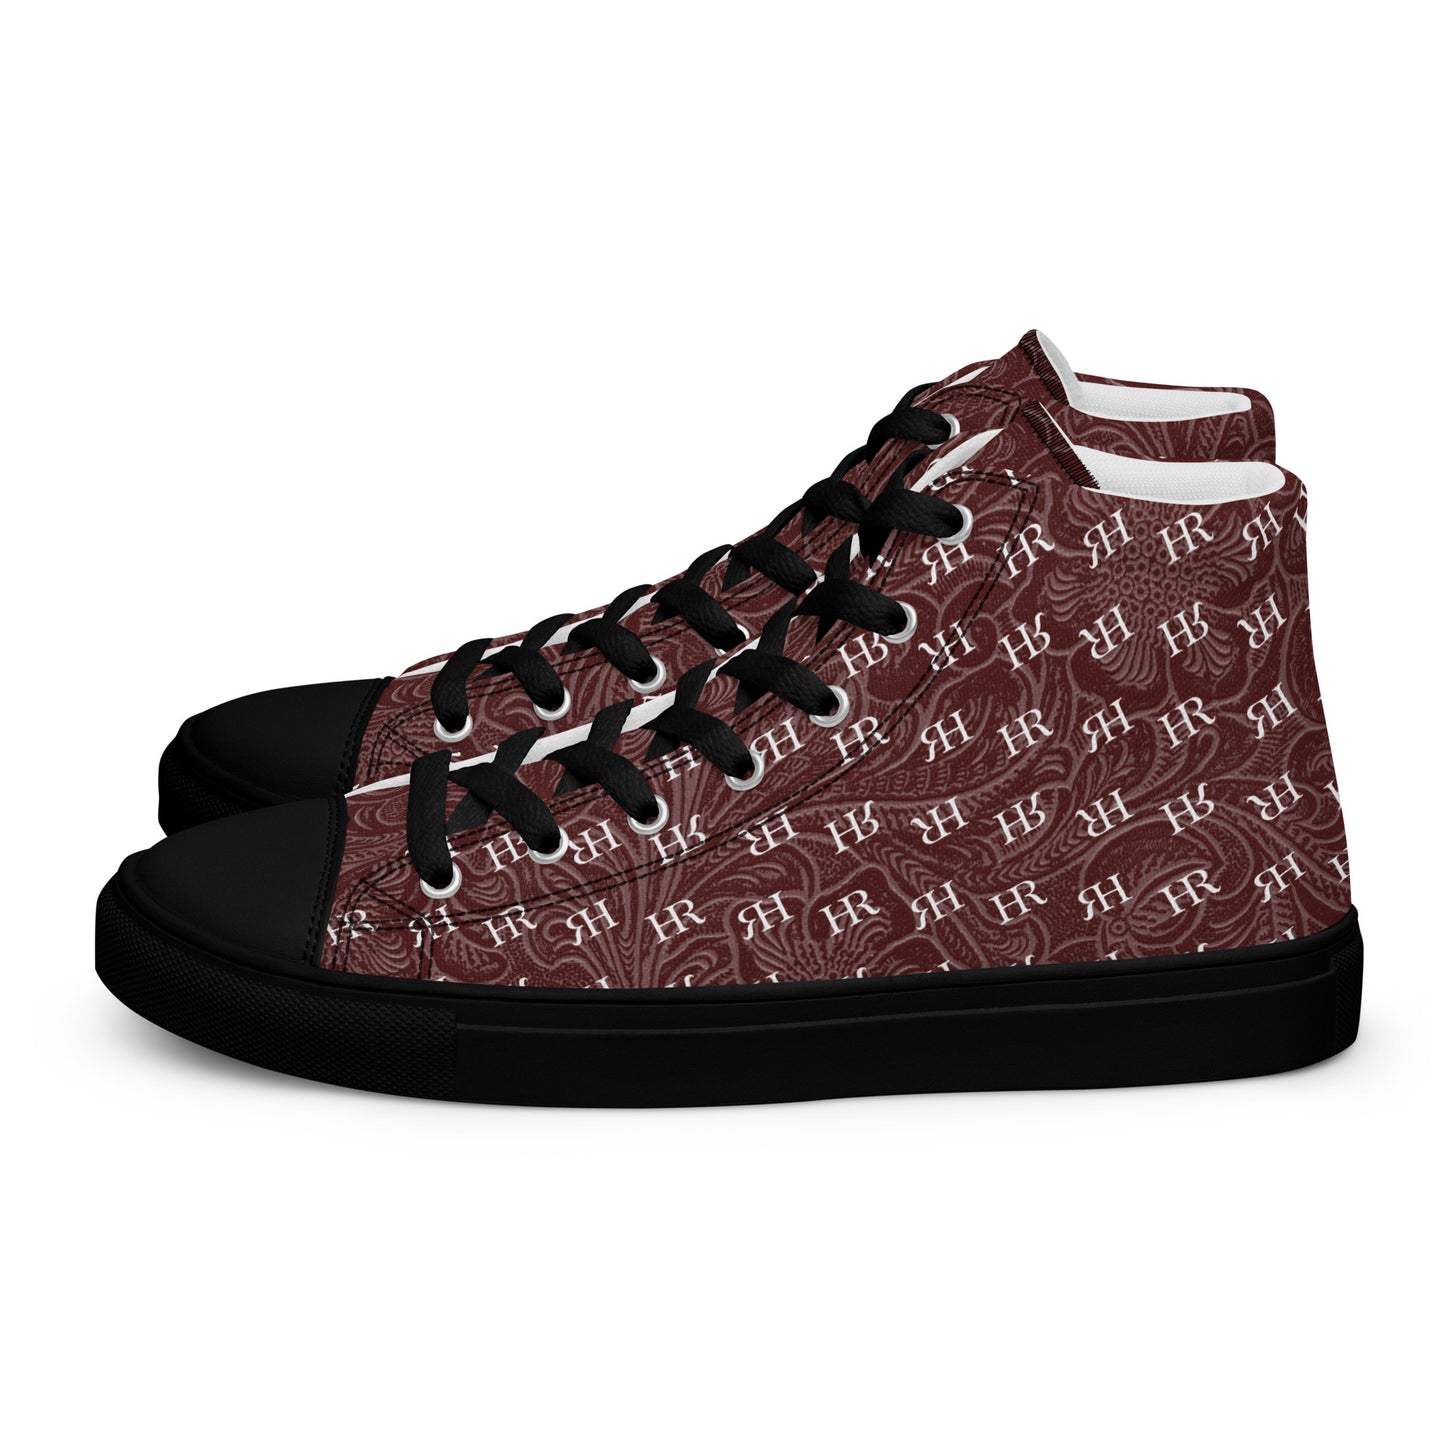 Humareso Team Lead Special Edition - Womens High-Tops